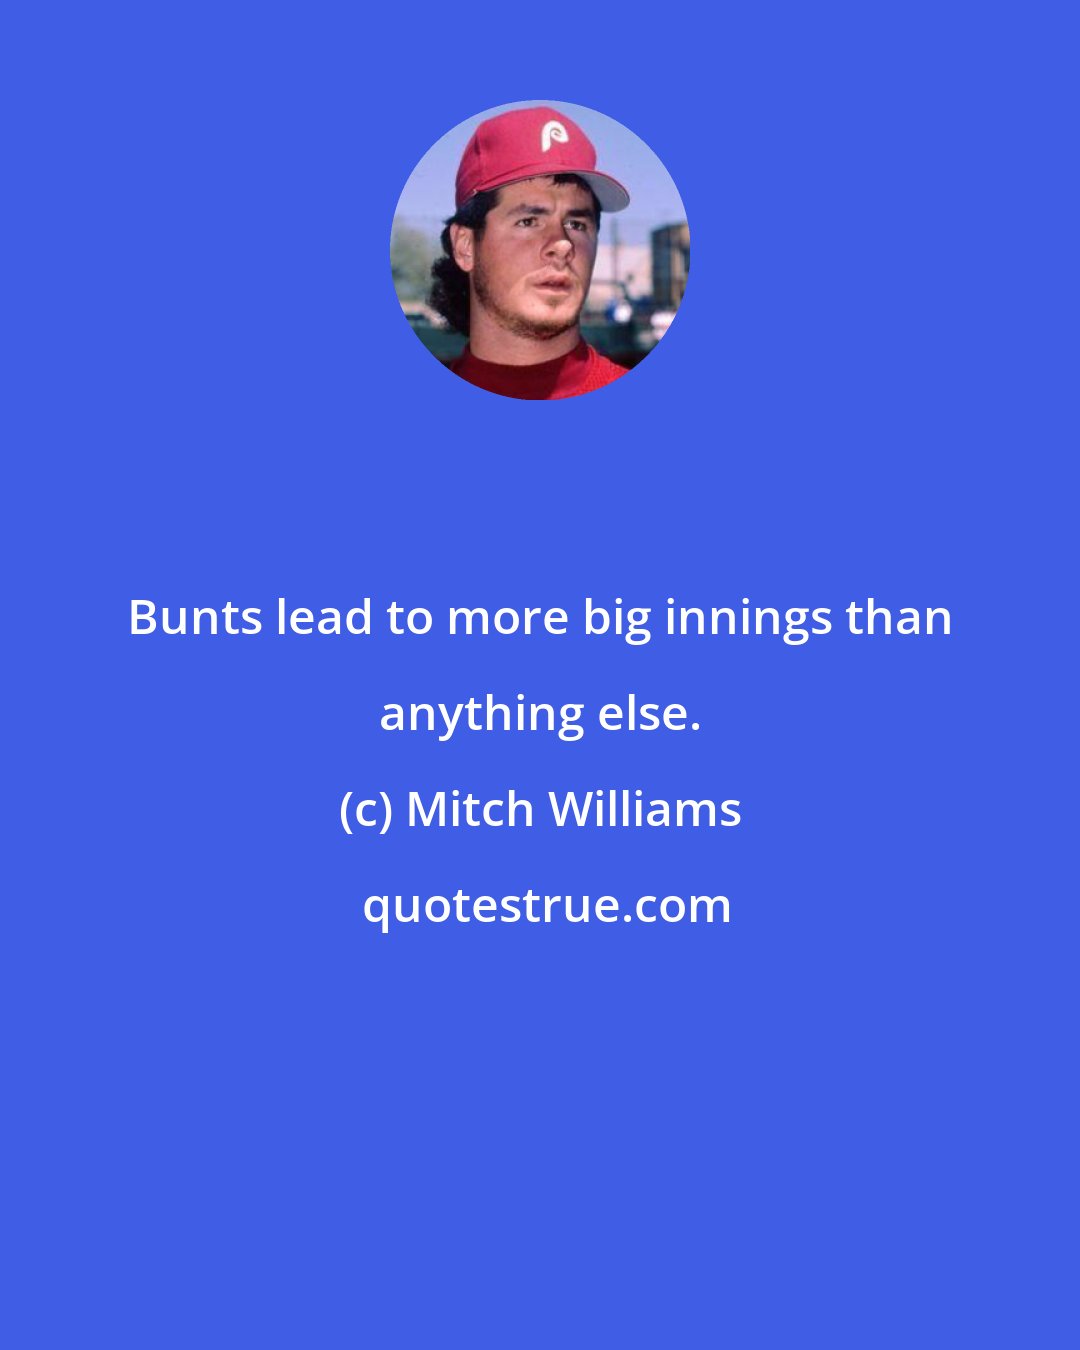 Mitch Williams: Bunts lead to more big innings than anything else.